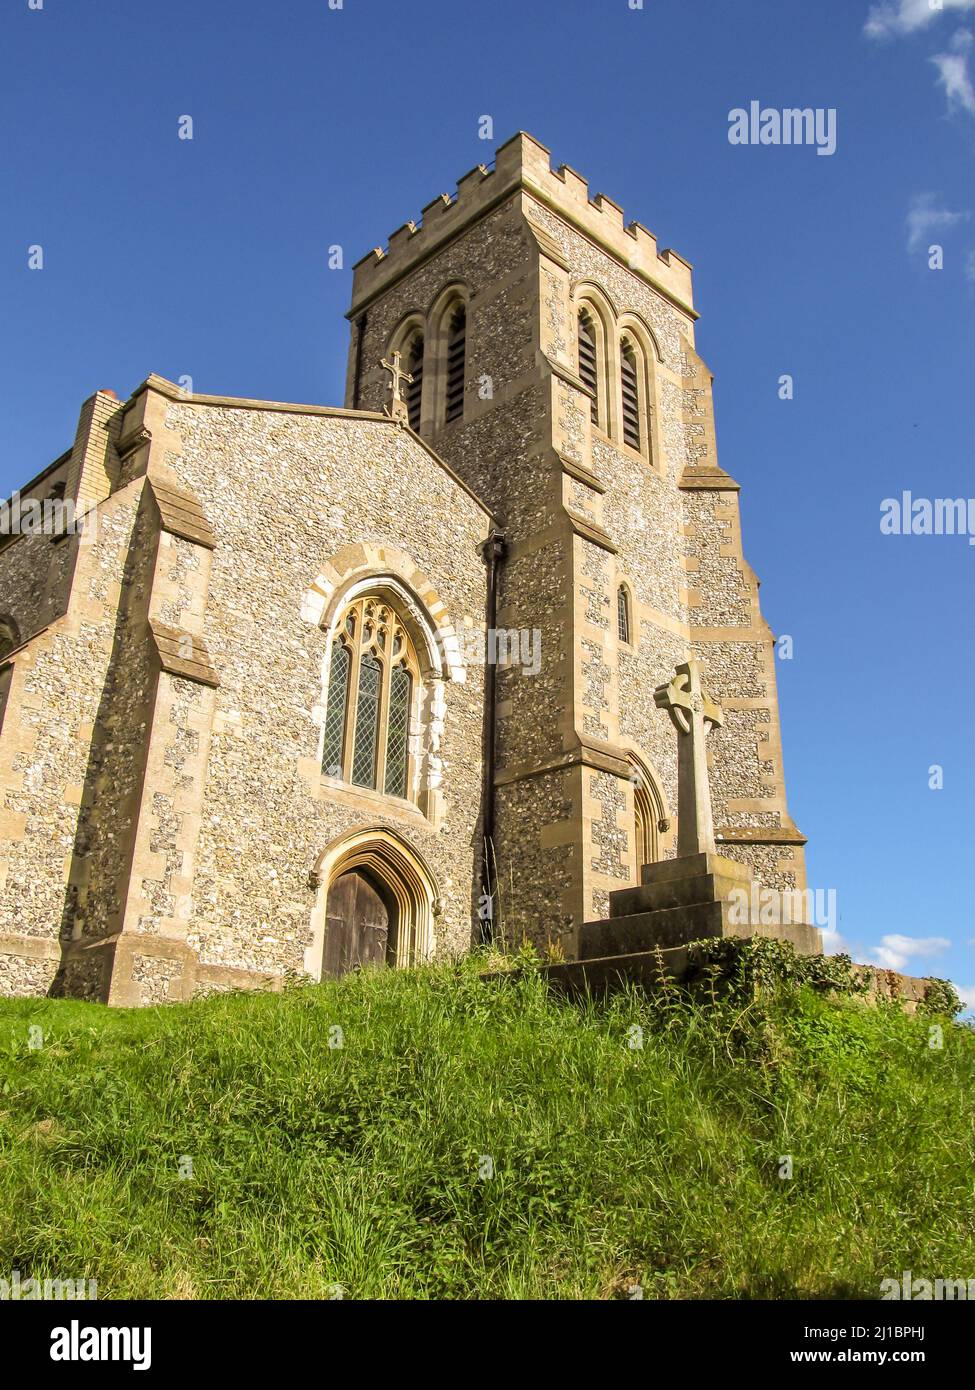 Looking up at the 15th Century Ellesborough church, on a small grassy hill, against a clear blue sky, inn the Chiltern Hills, England, UK Stock Photo